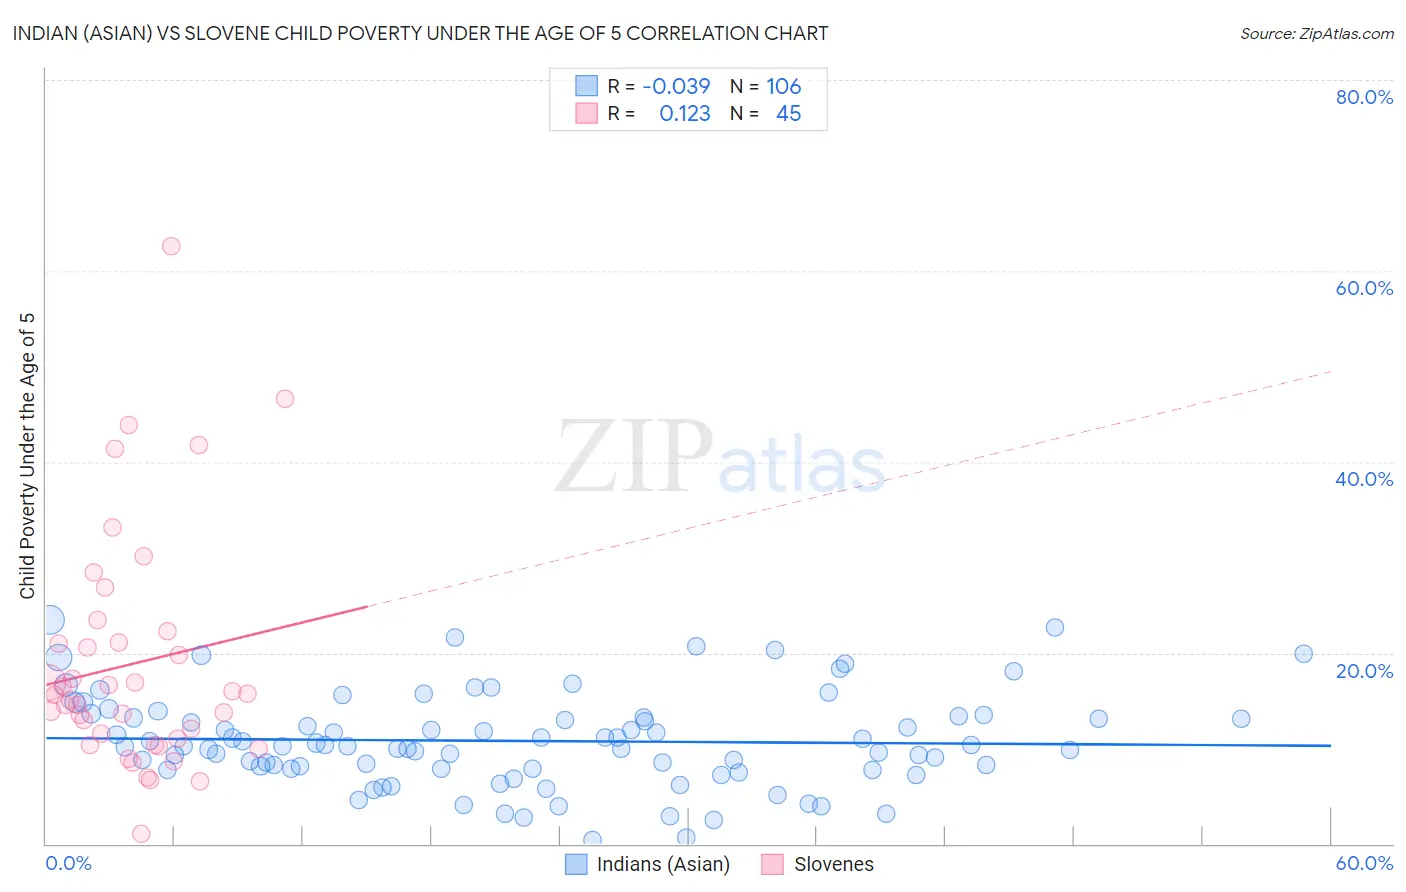 Indian (Asian) vs Slovene Child Poverty Under the Age of 5